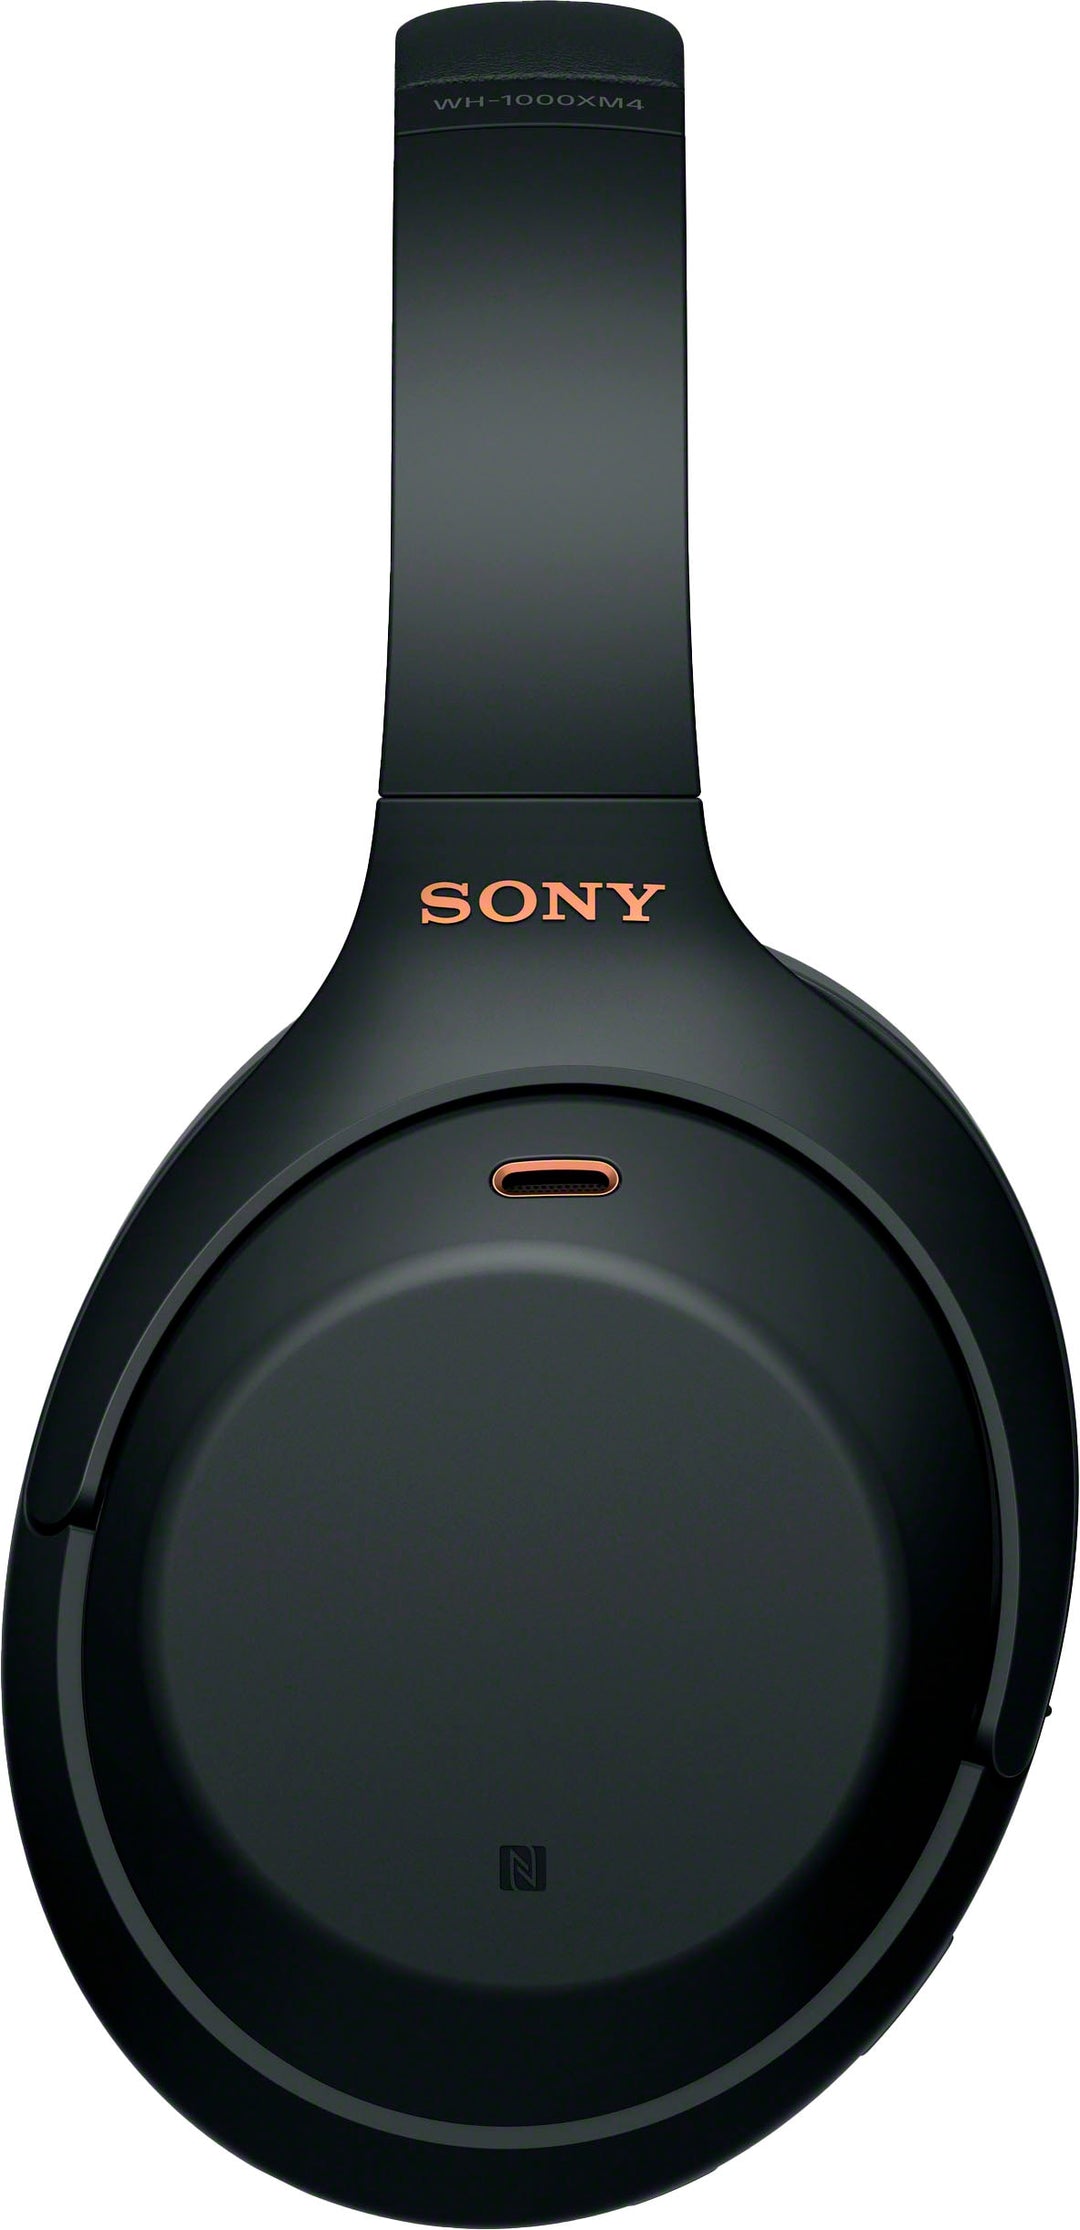 Sony - WH-1000XM4 Wireless Noise-Cancelling Over-the-Ear Headphones - Black_8